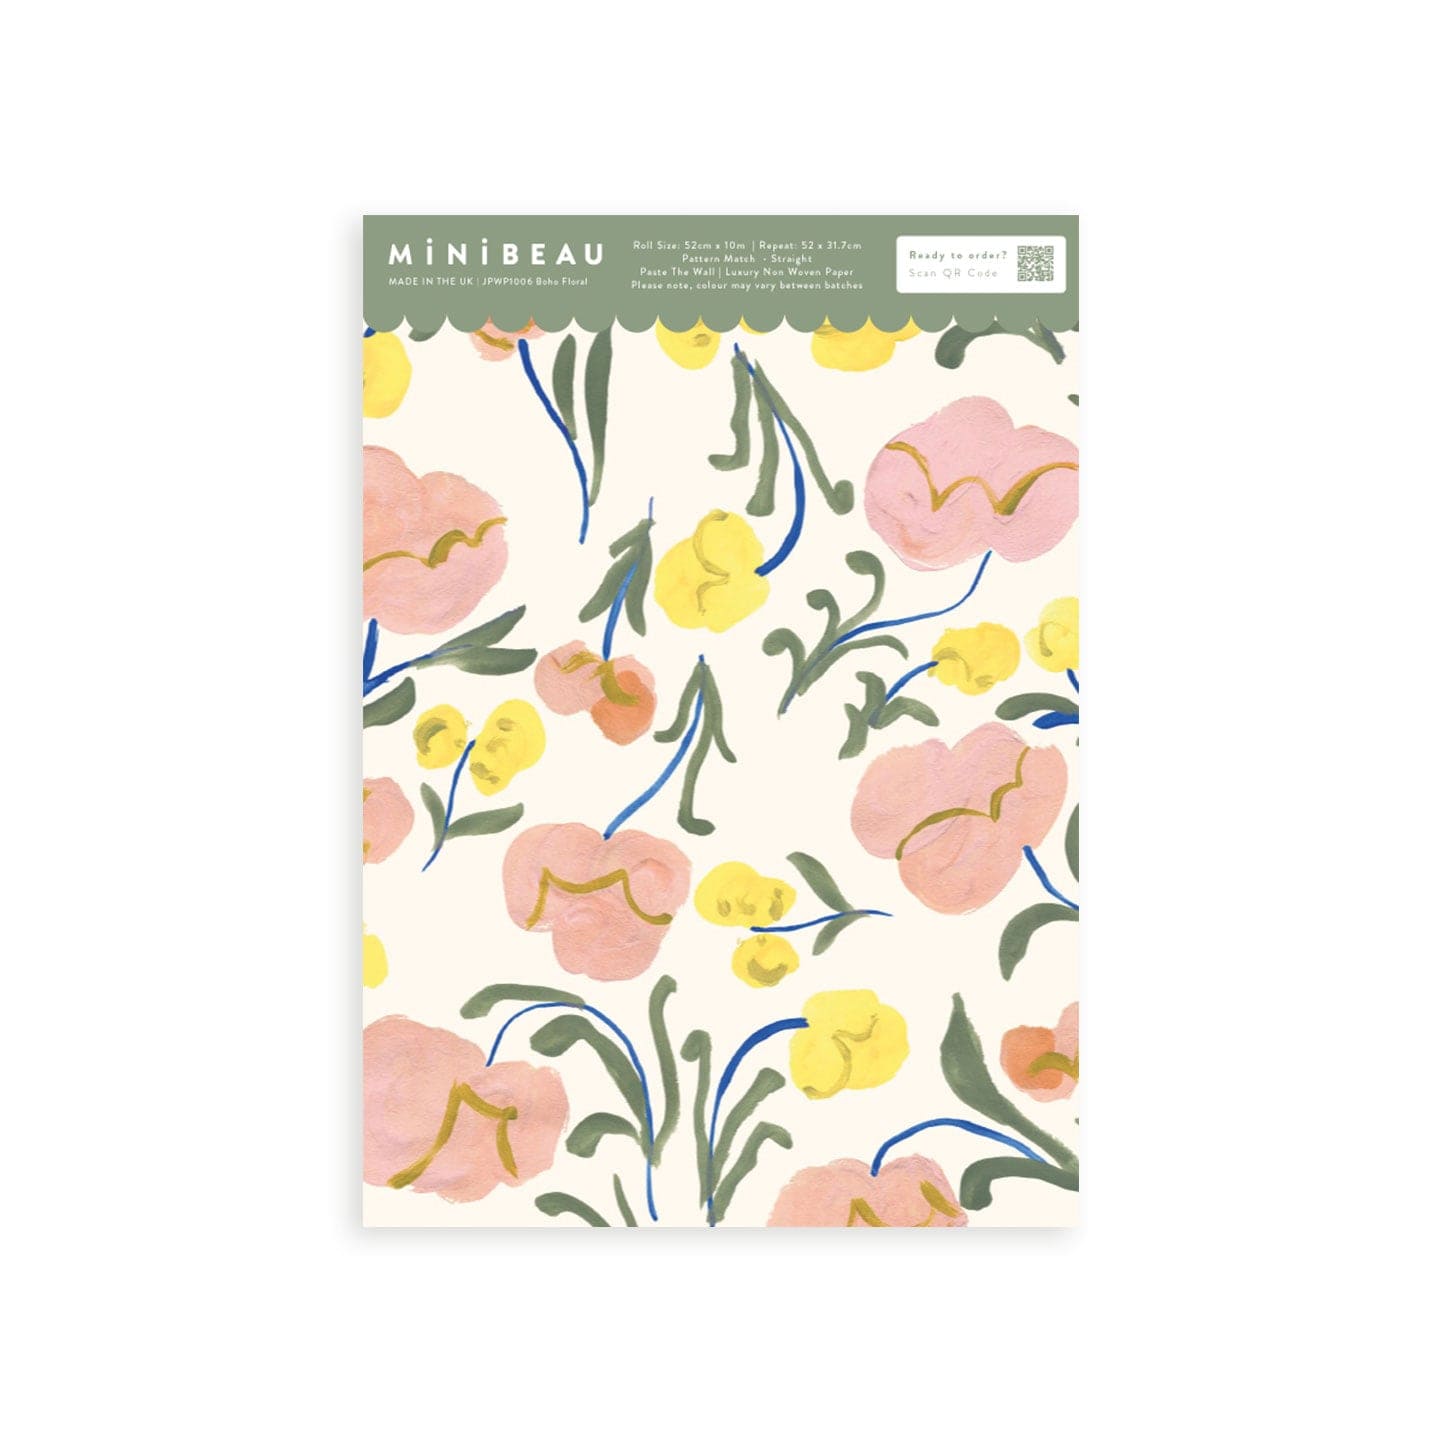 Sample of Floral wallpaper with pink and yellow flowers, blue stems and green leaves